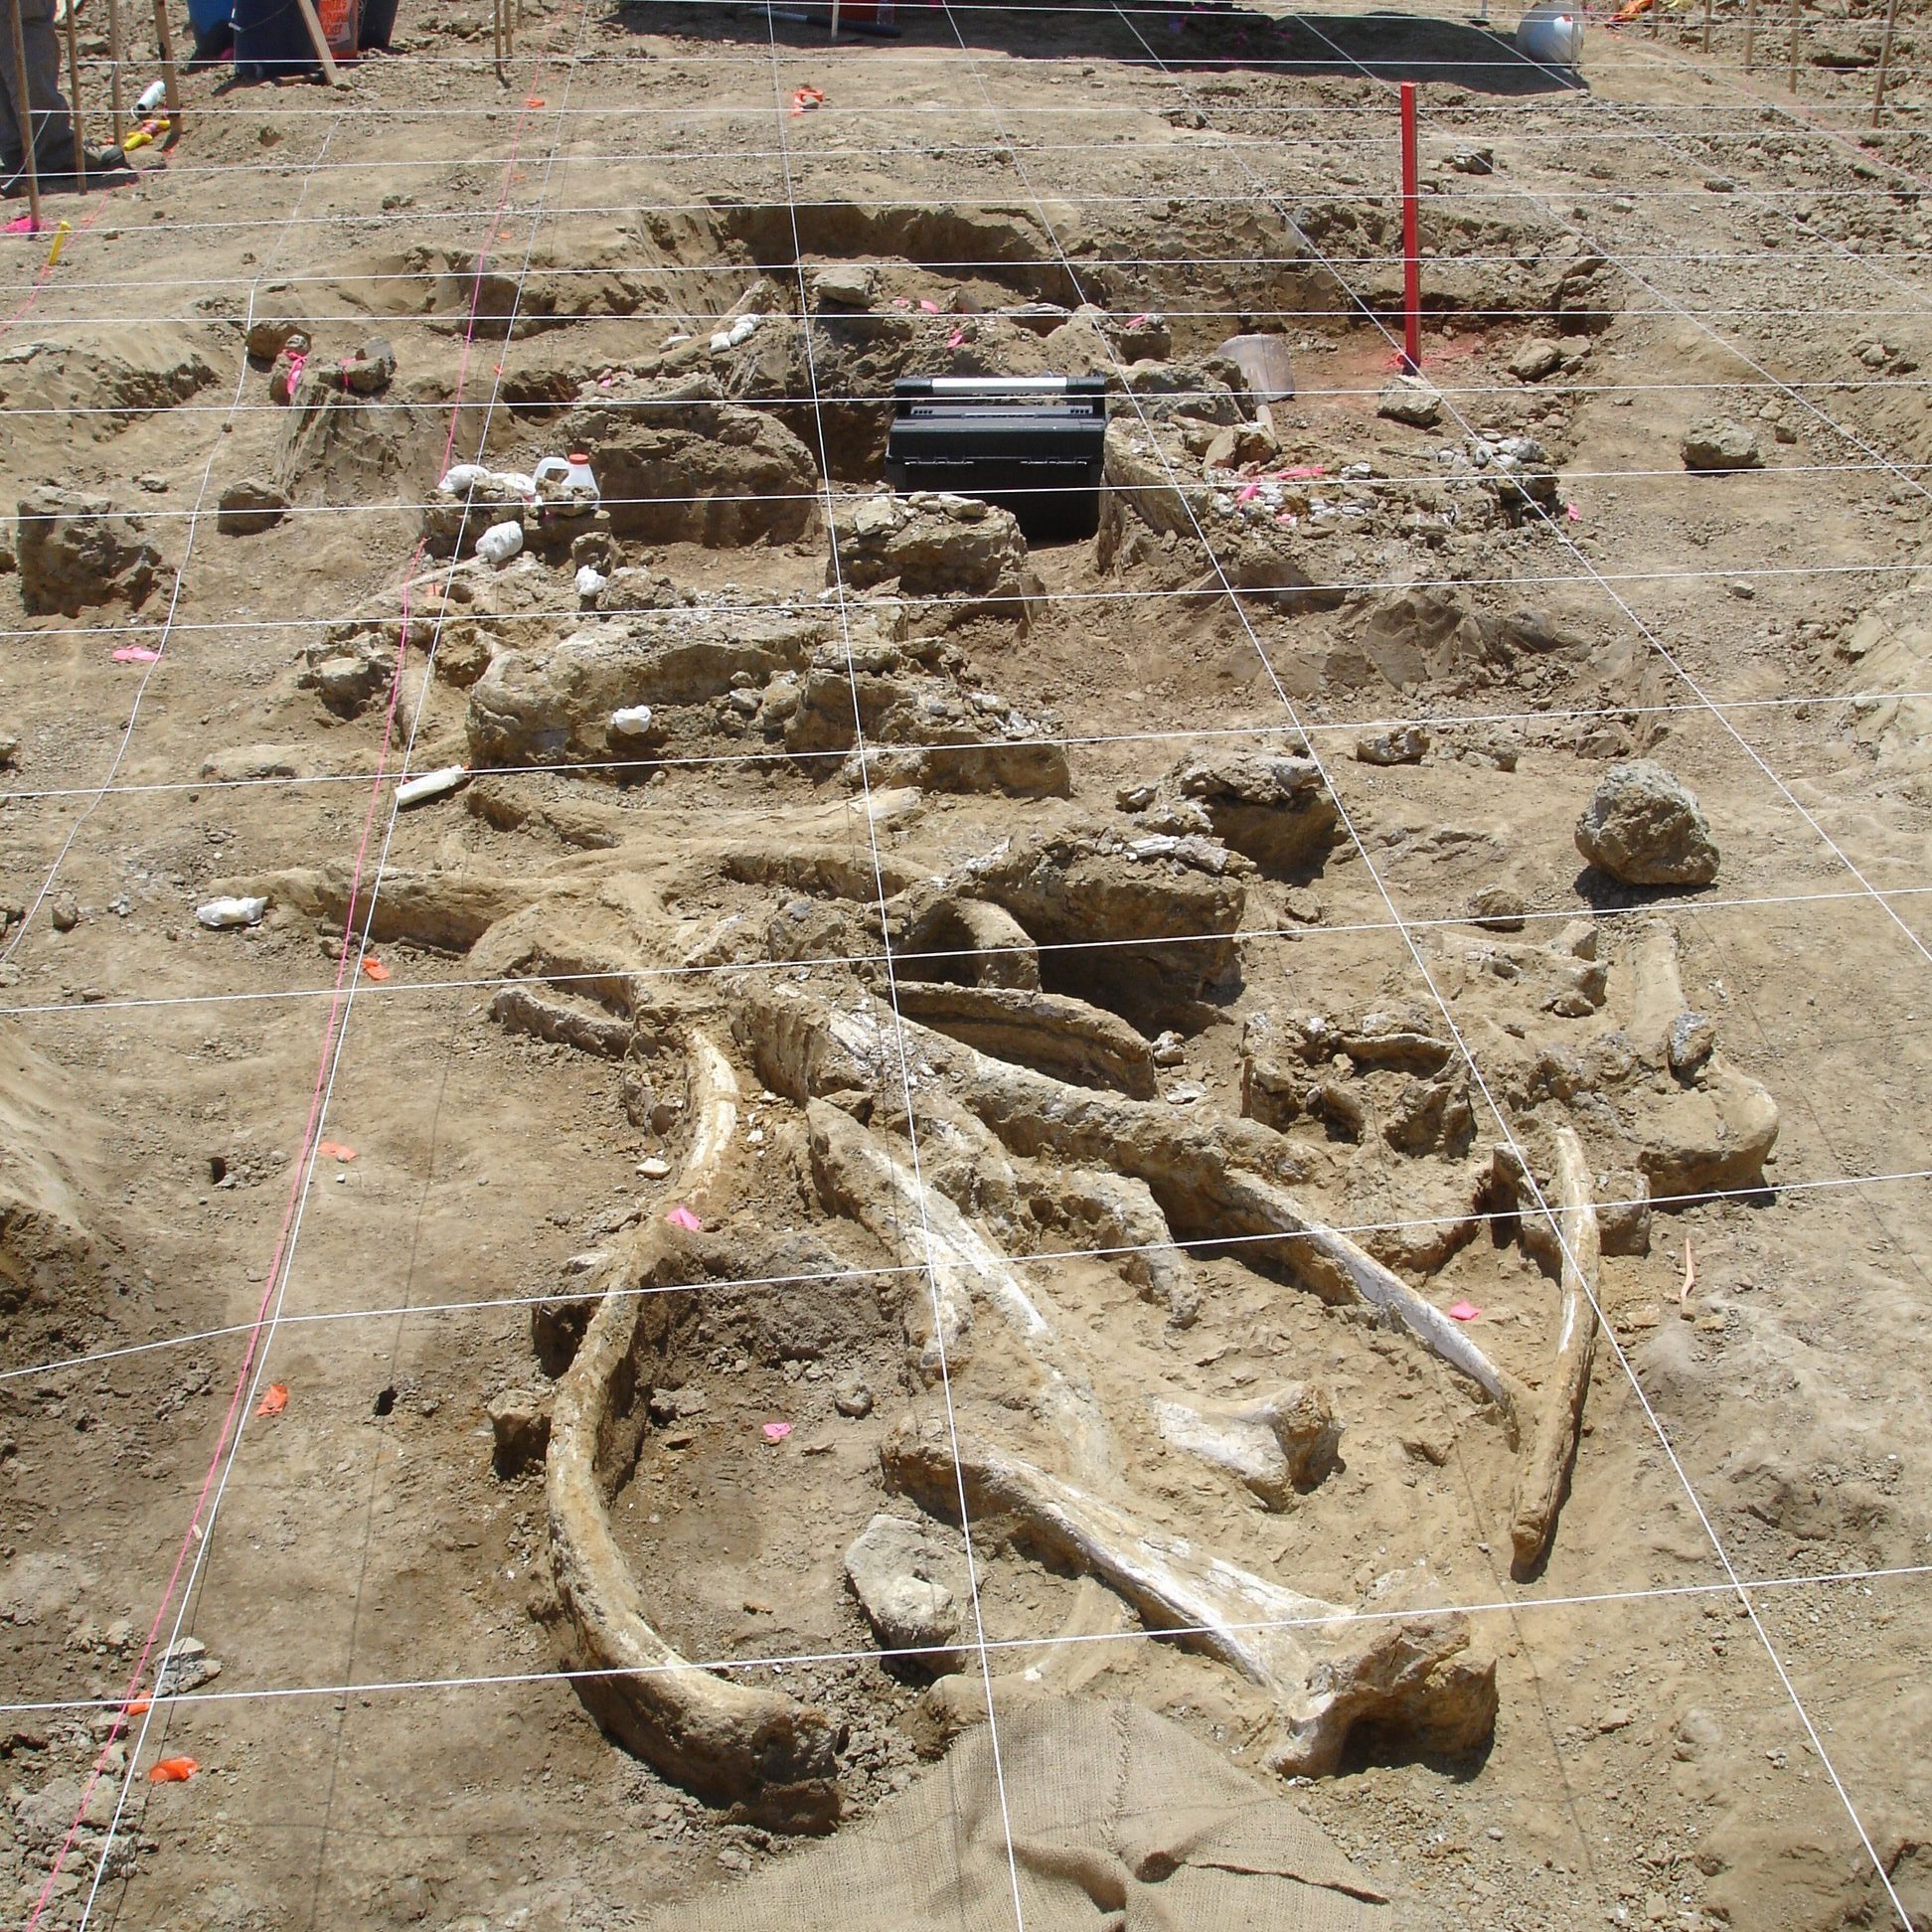 A delineated dig site where mammoth bones were discovered.